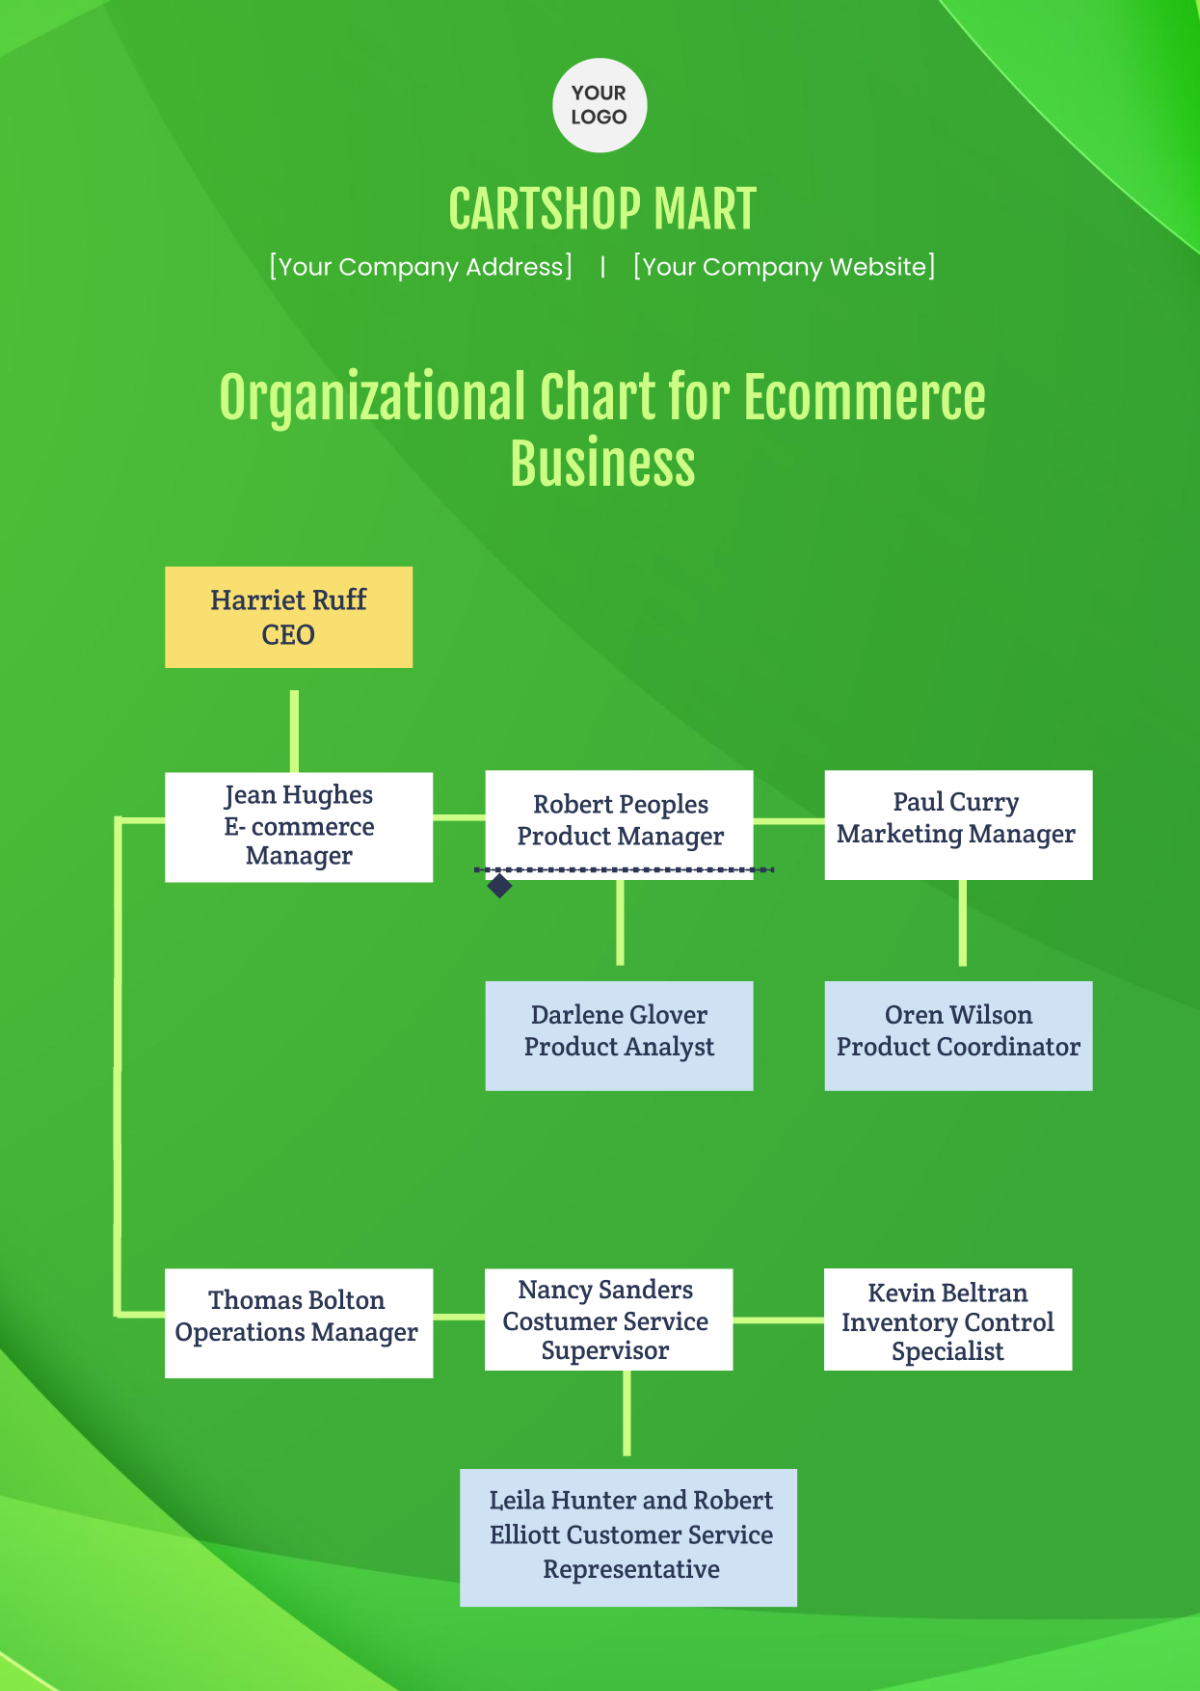 Organizational Chart for Ecommerce Business